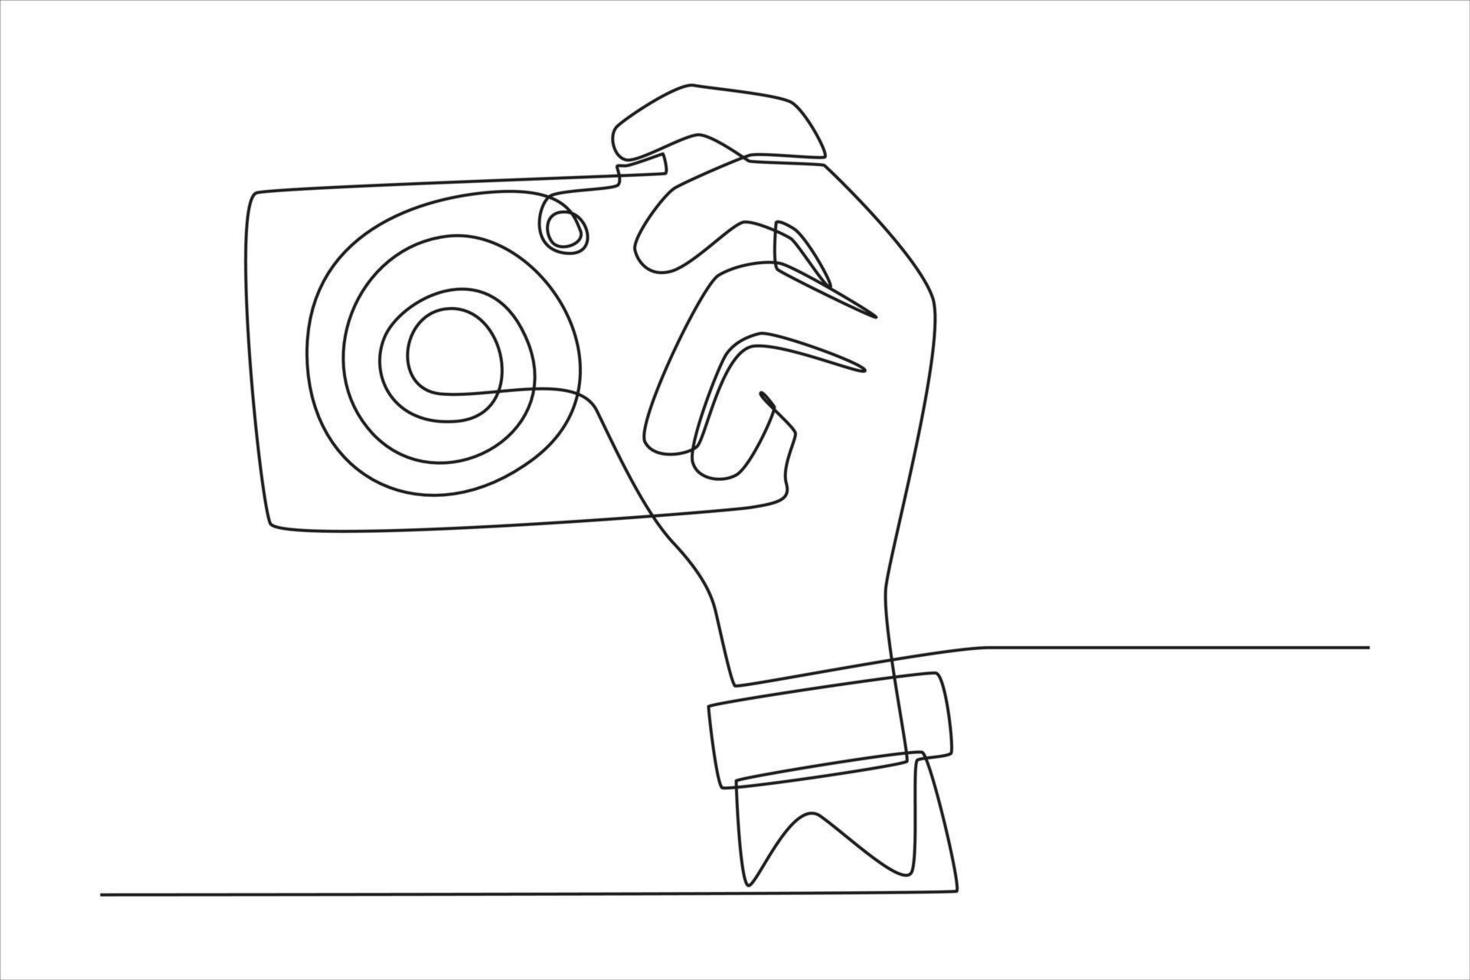 Continuous one line drawing Hand holding camera. World photo day concept. Single line draw design vector graphic illustration.